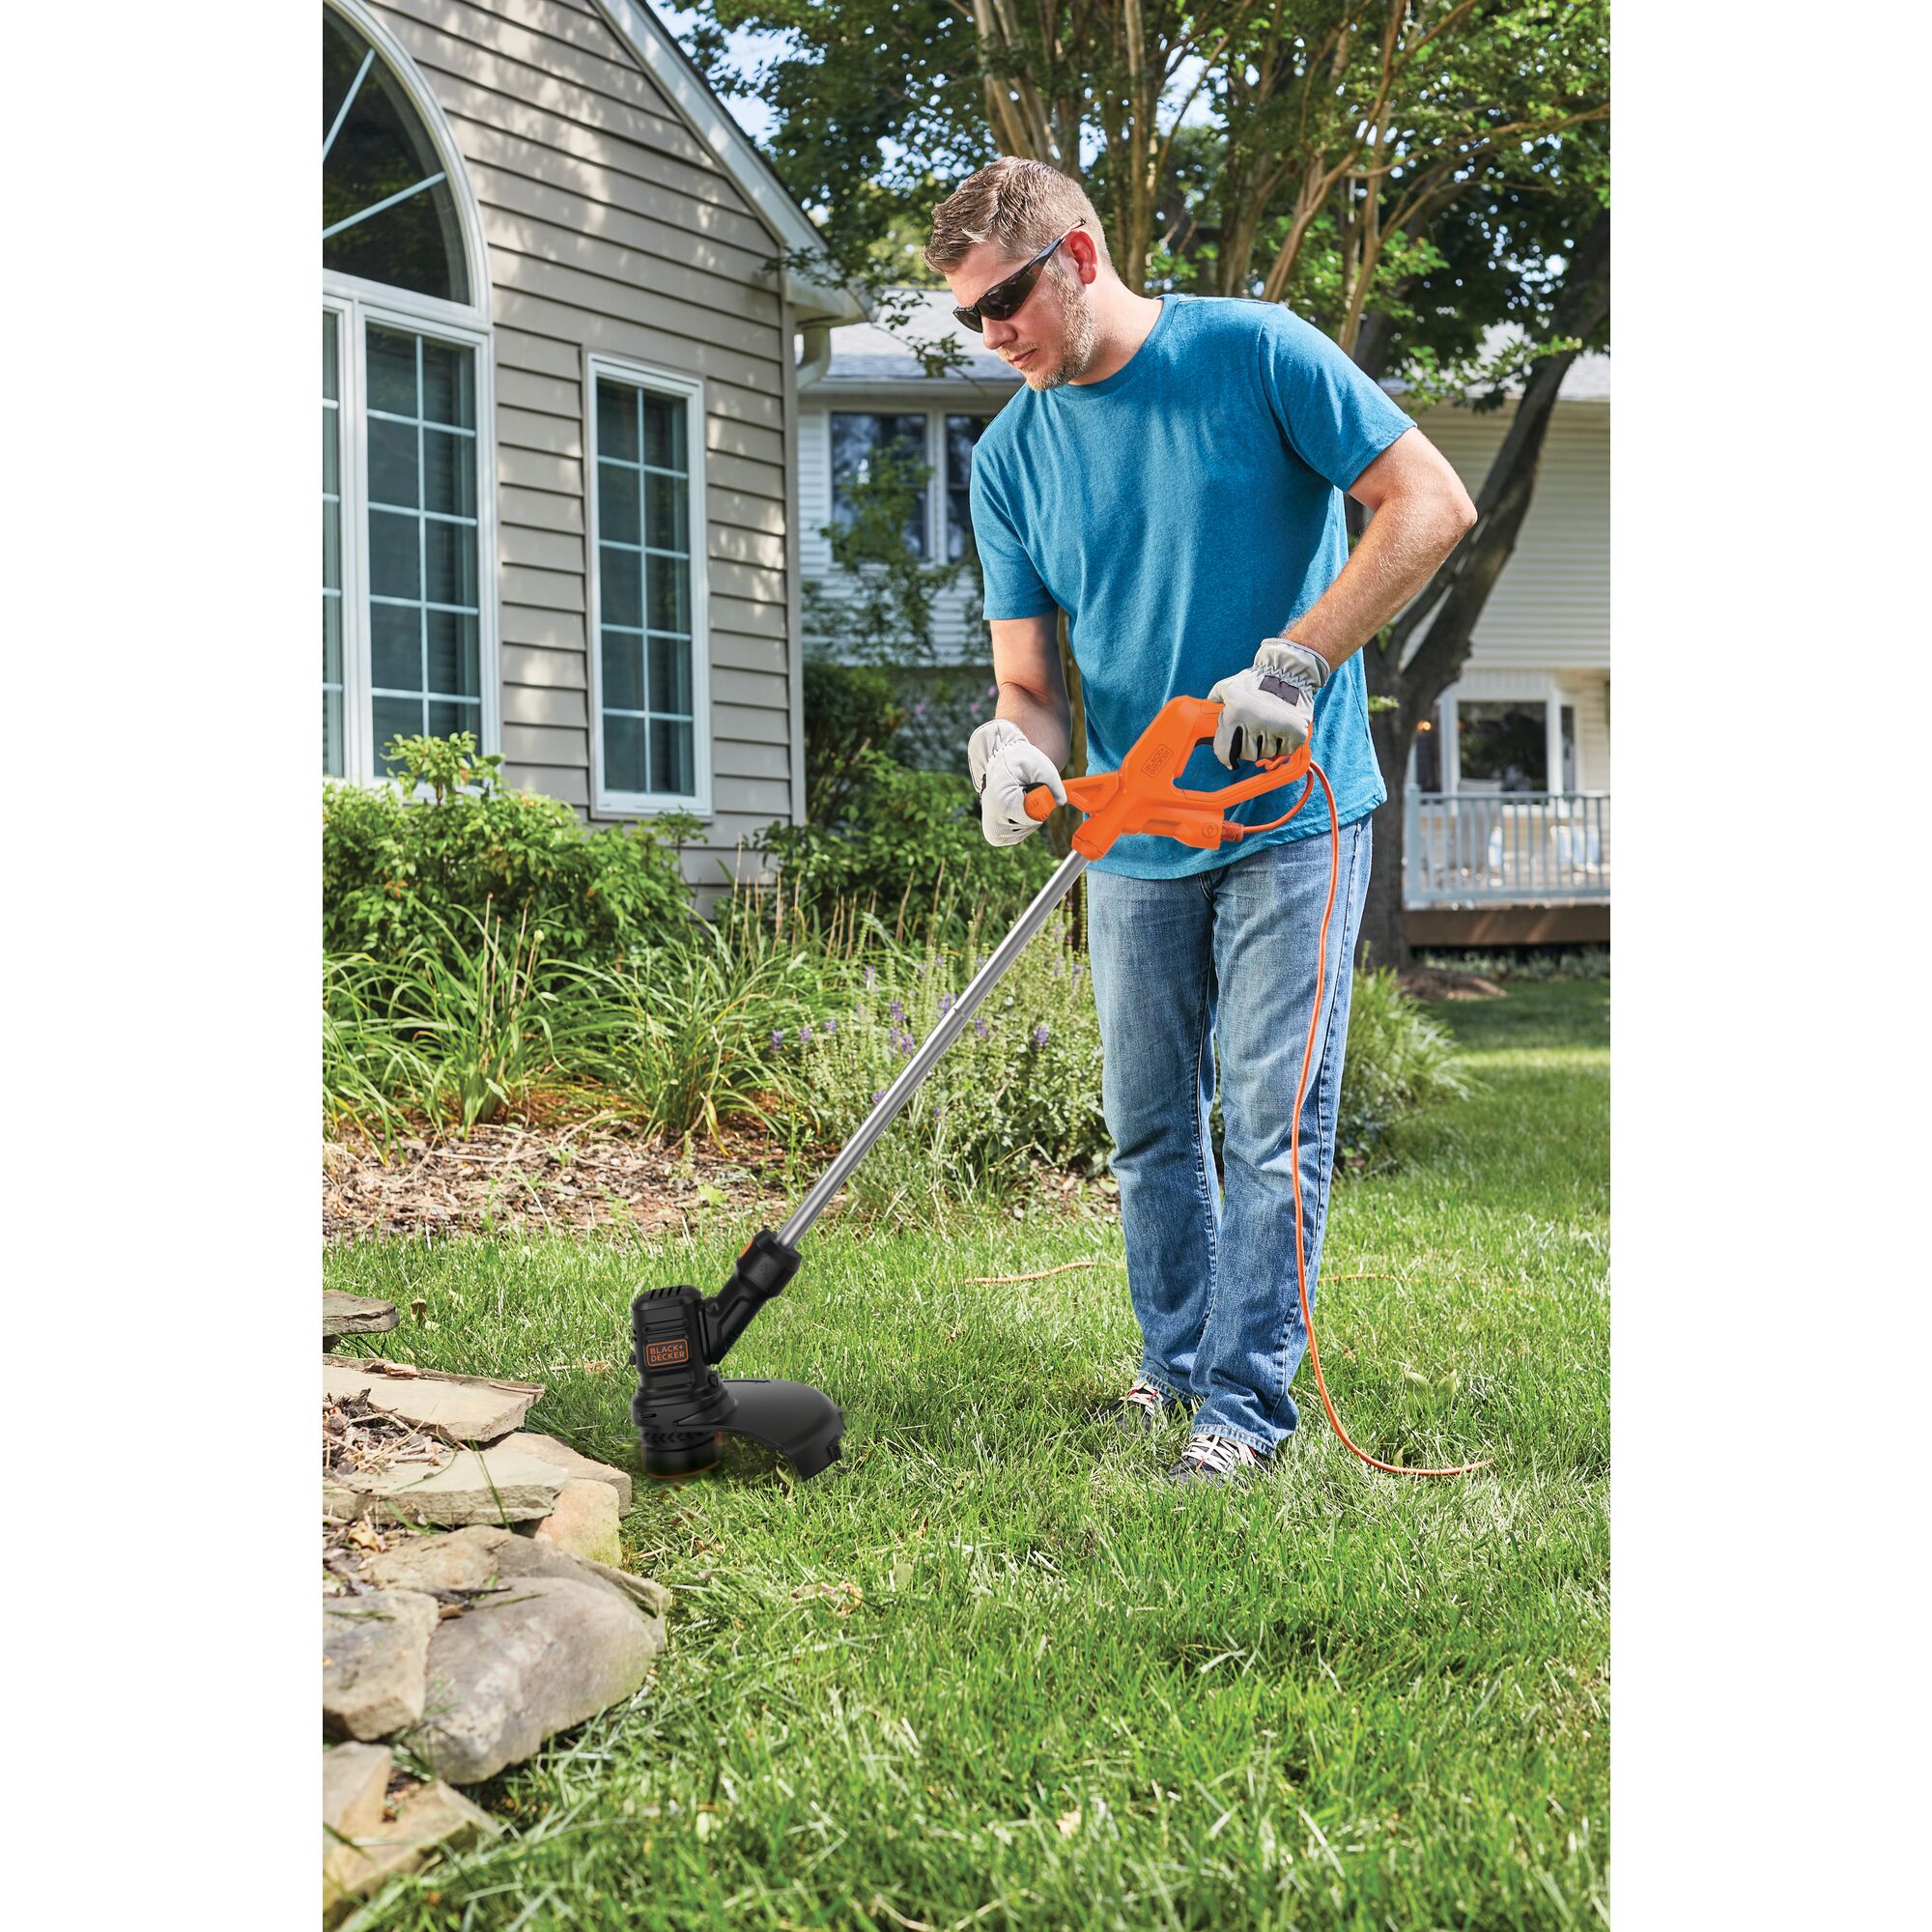 Electric string trimmer being used by a person to trim grass.\n